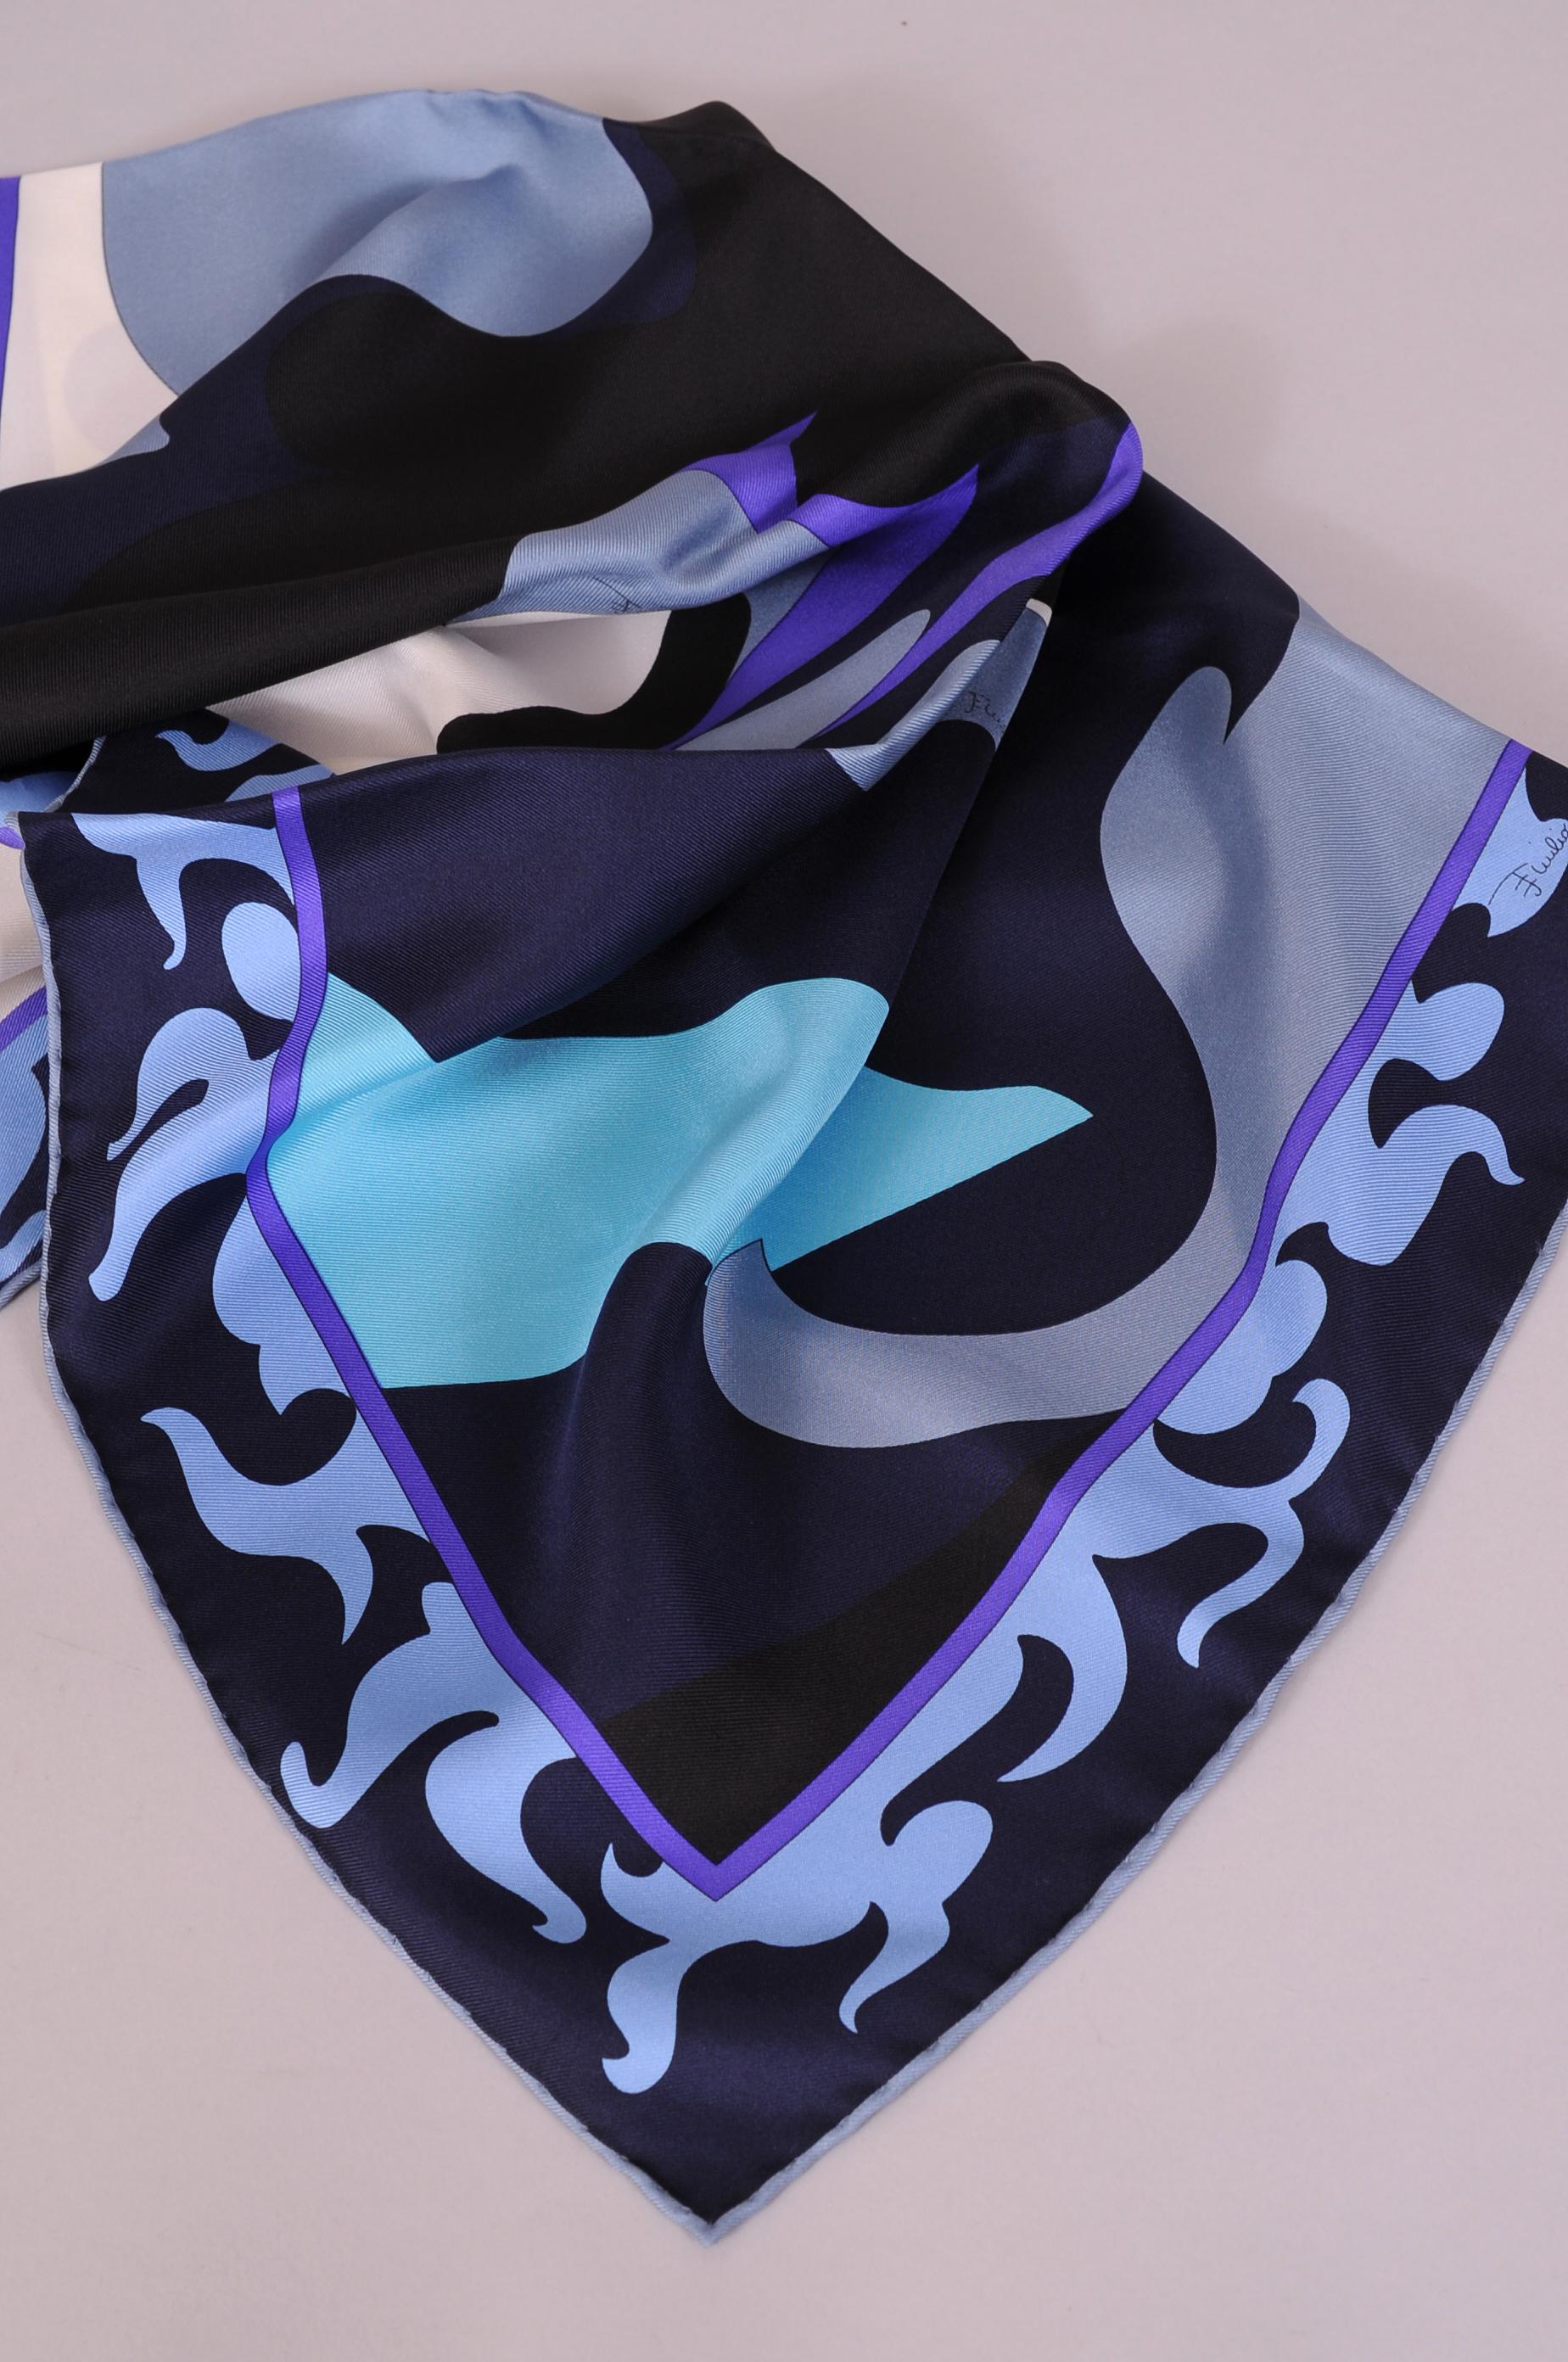 Black and blue with purple, turquoise, grey and white are used for this colorful, small size scarf from Pucci. It is in excellent condition.
Measurements;
22